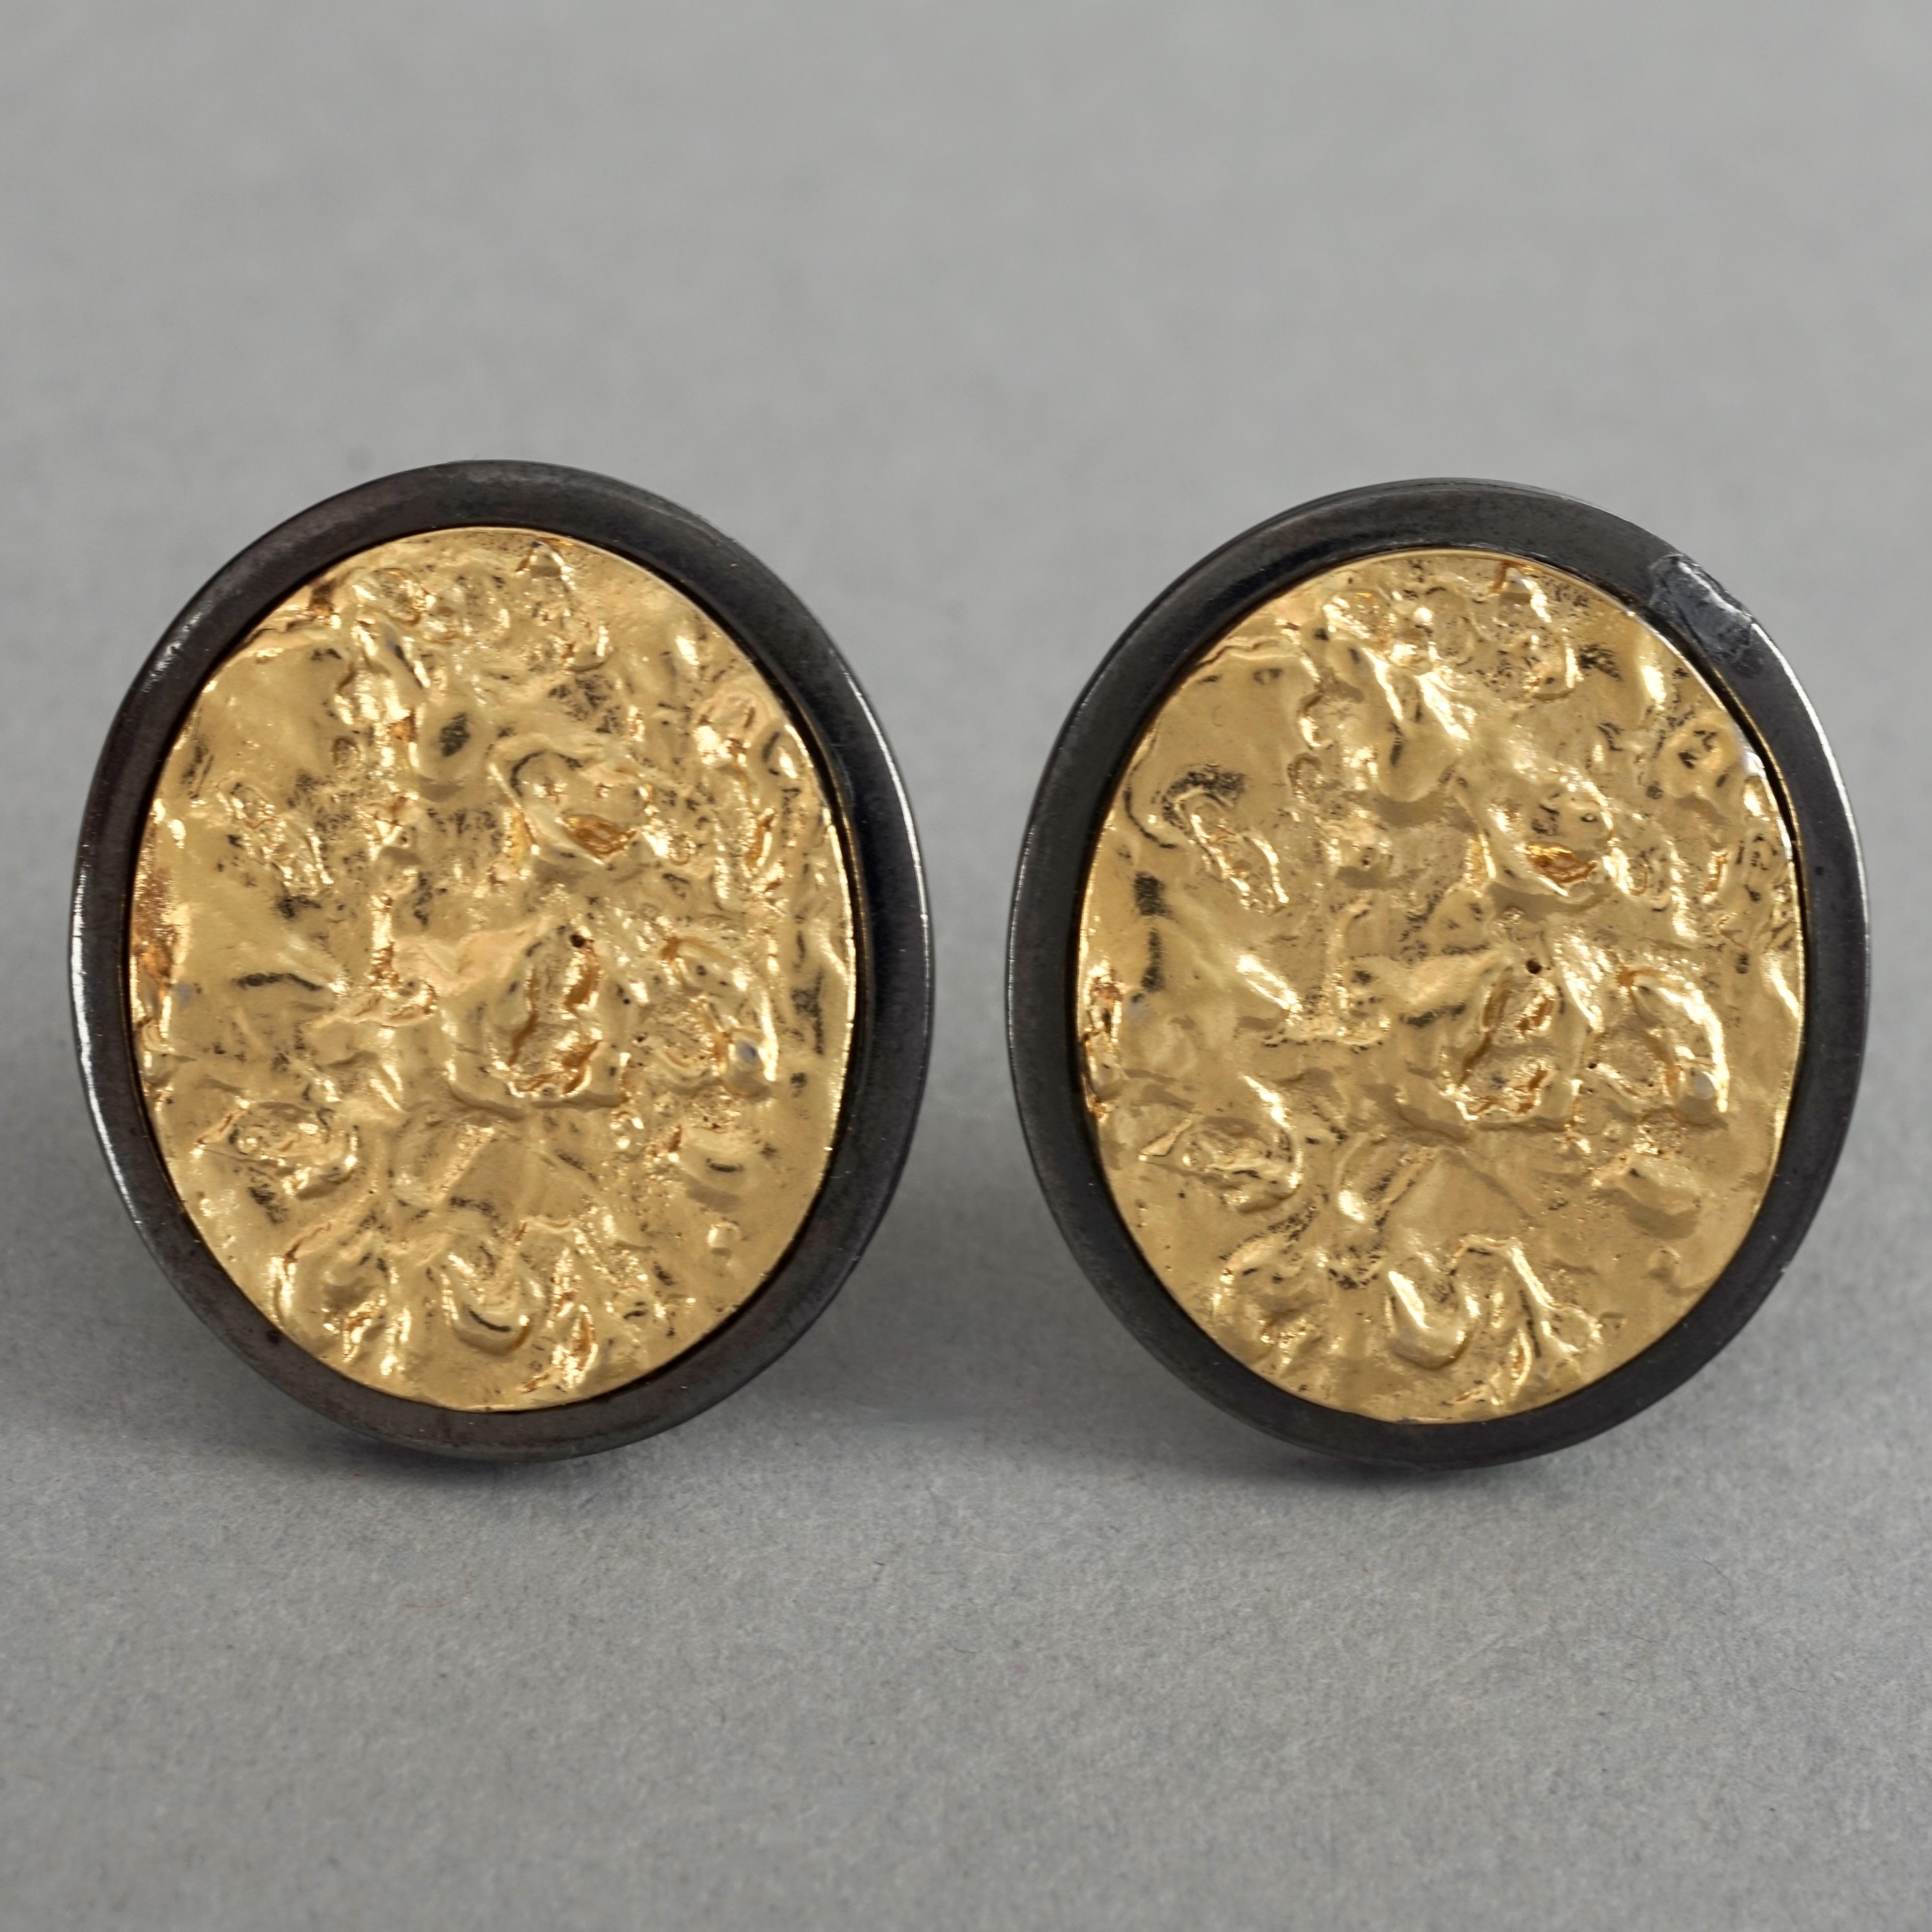 Vintage YVES SAINT LAURENT Ysl Two Tone Textured Oval Disc Earrings For Sale 1